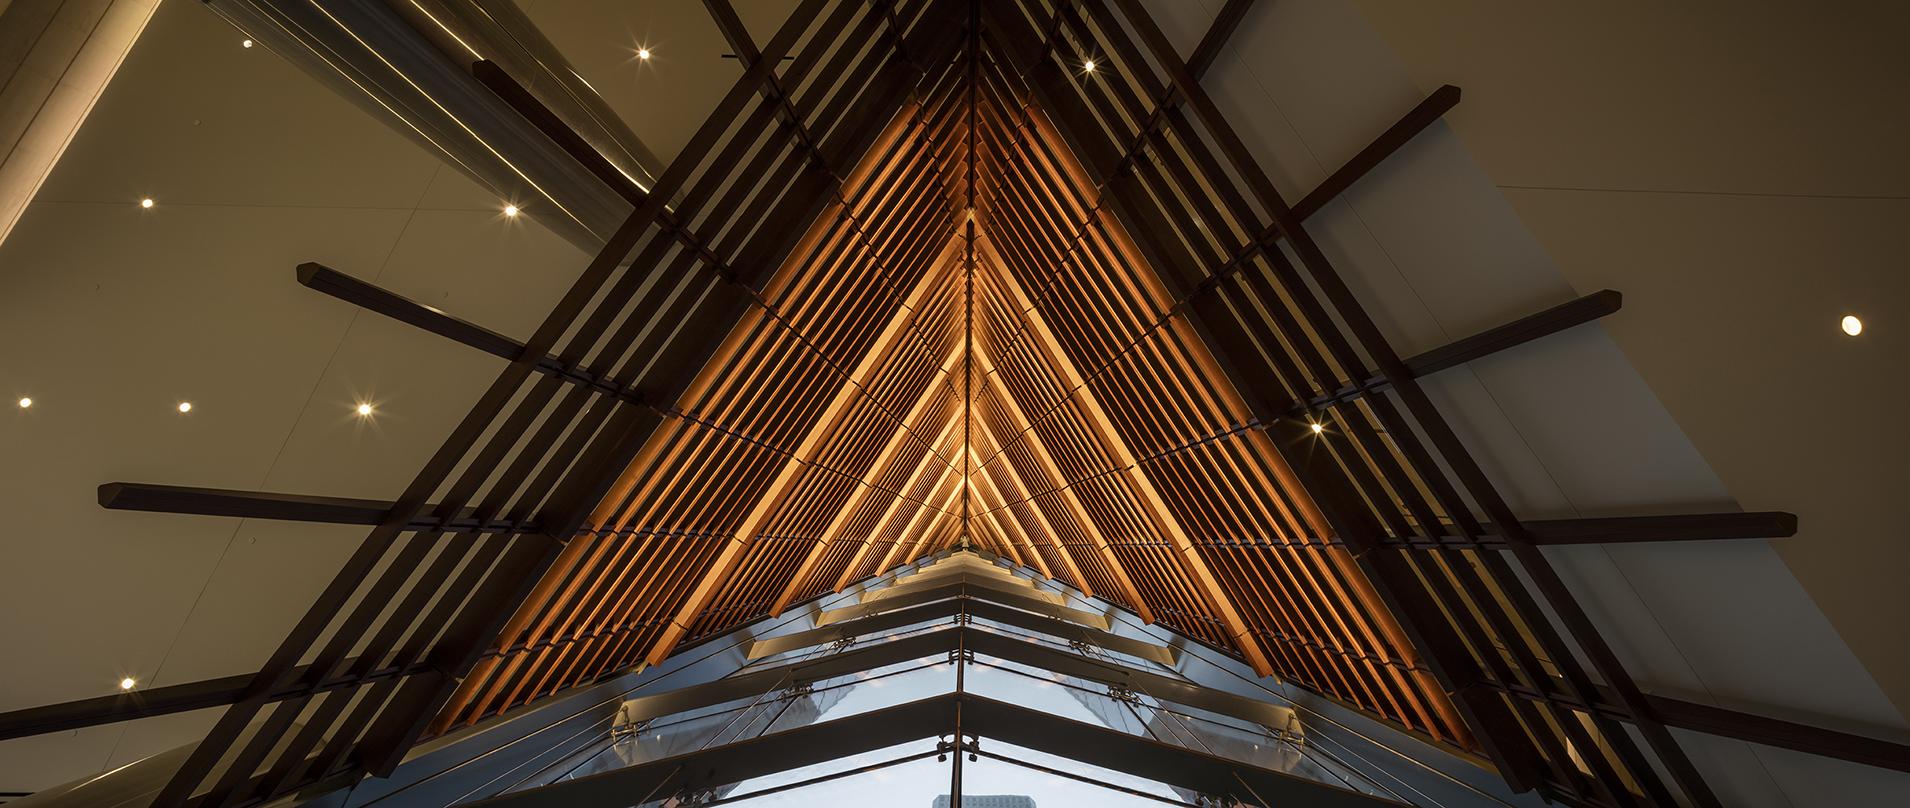 dramatic view looking up at the illuminated wooden screen in the lobby of 609 Main